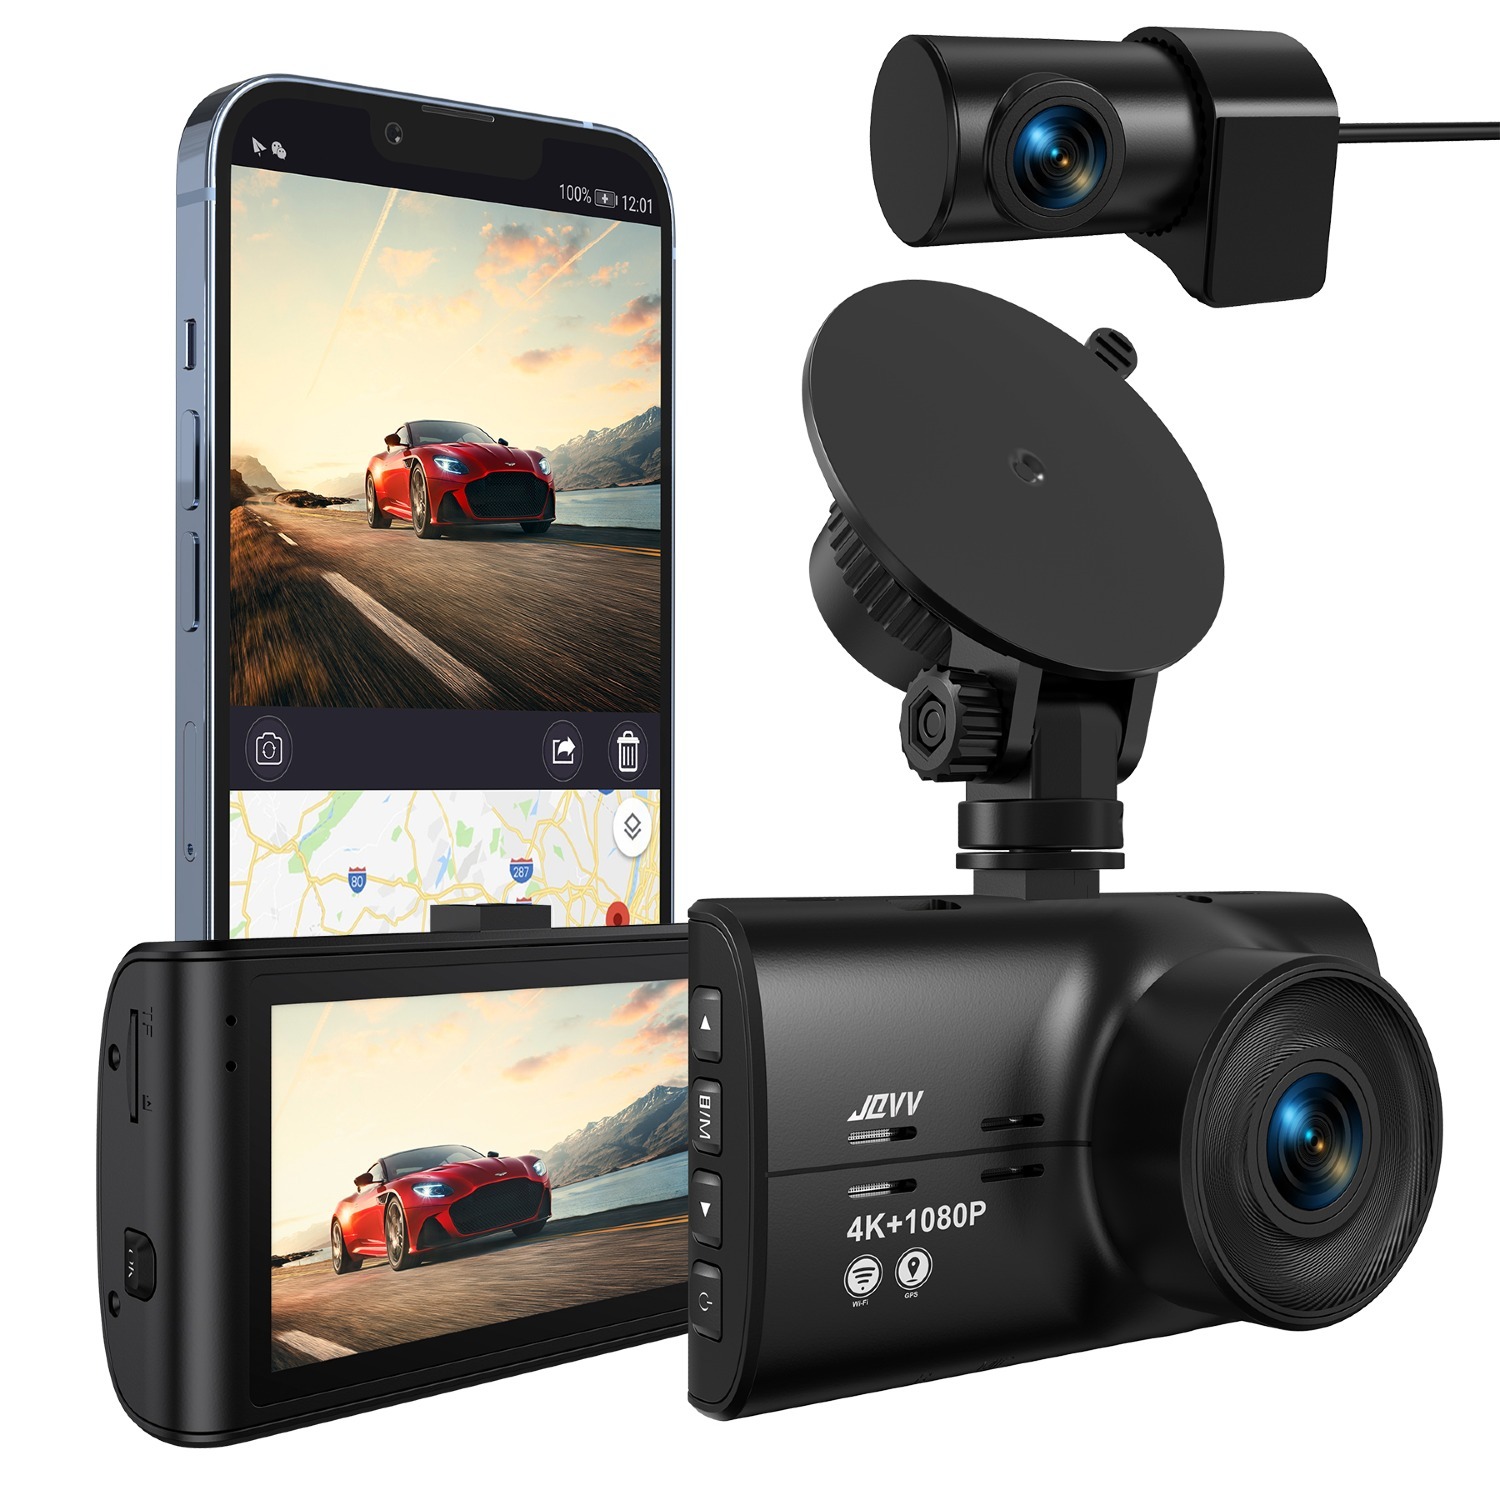 JQVV Dash Cam 4K/2.5K Front & 1080P Rear w/ WiFi, GPS, Night Vision, Parking Mode, Supports up to 256GB Storage $46 + Free Shipping